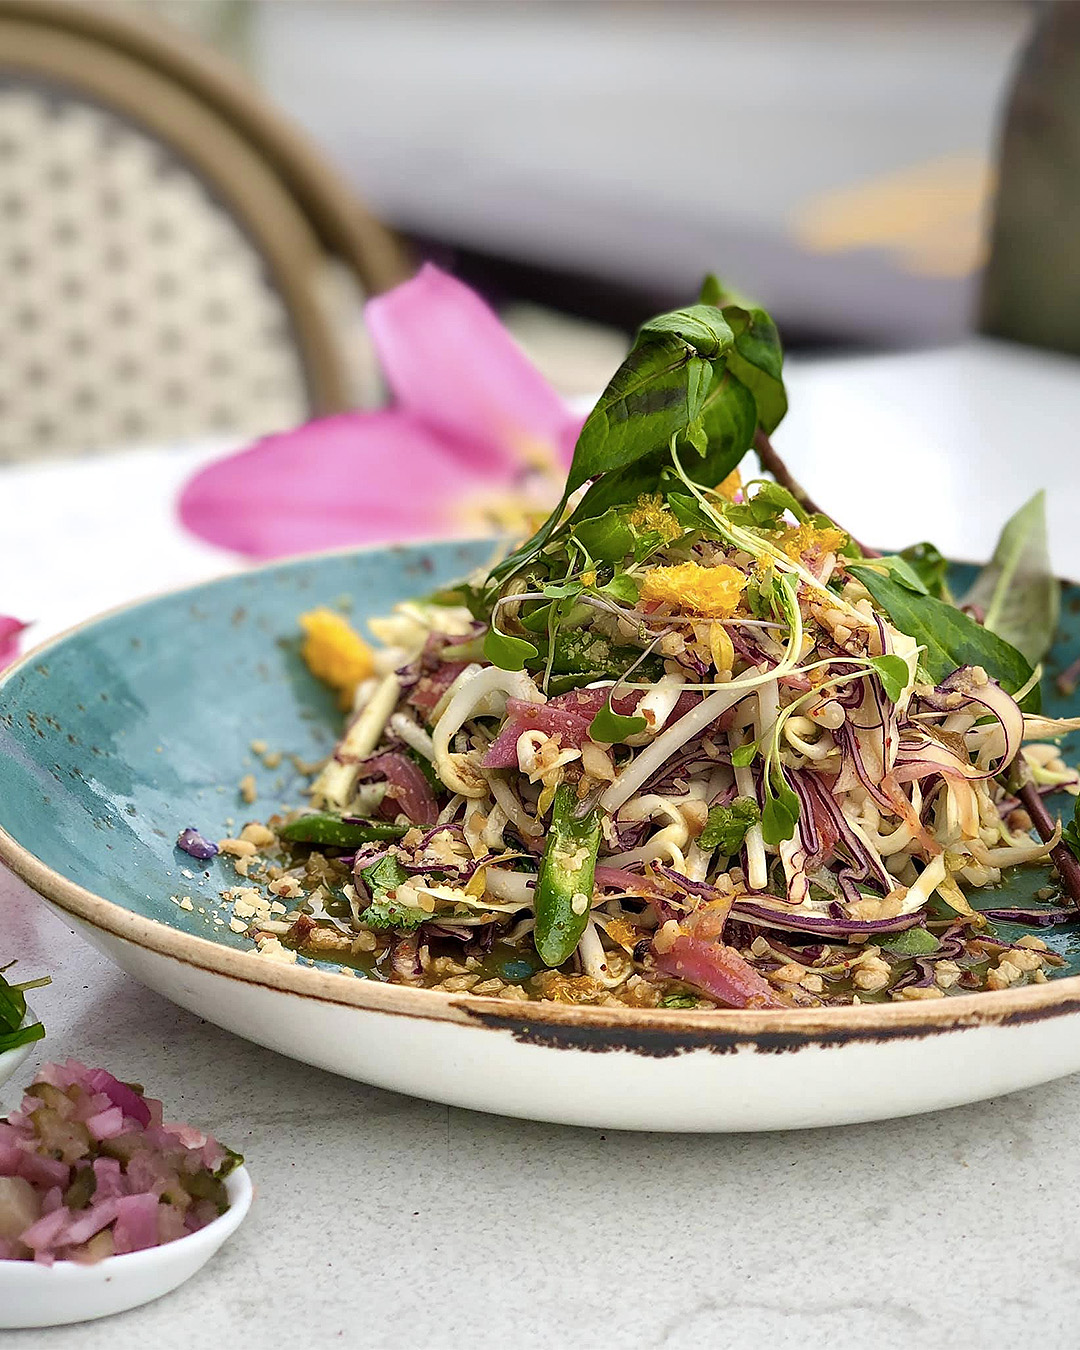 Shaved Red & Green Cabbage is tossed together with Sliced Green Beans, Candied Crumbled Peanuts, Mung Bean Sprouts and Pickled Carrots. Dressed in an Orange, Lime and GF Soy Sauce and topped with Crispy Mandarin Segments at Blue Kanu.